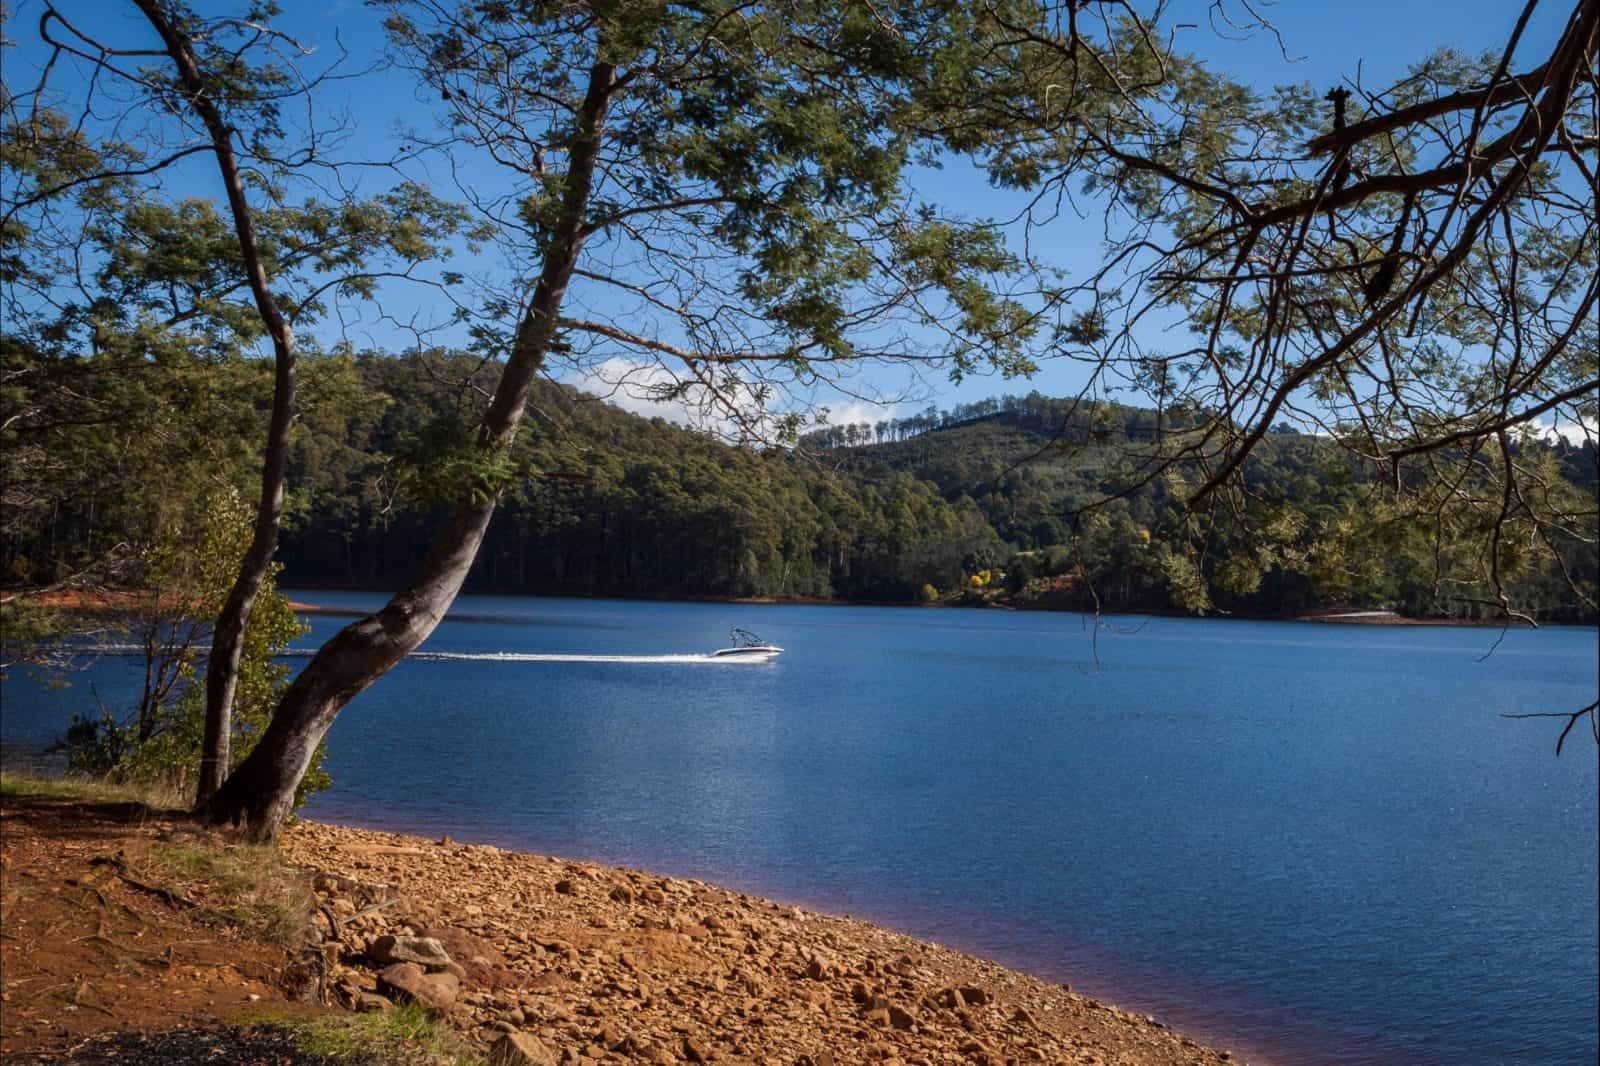 Lake Barrington is a great place for fishing, boating and camping